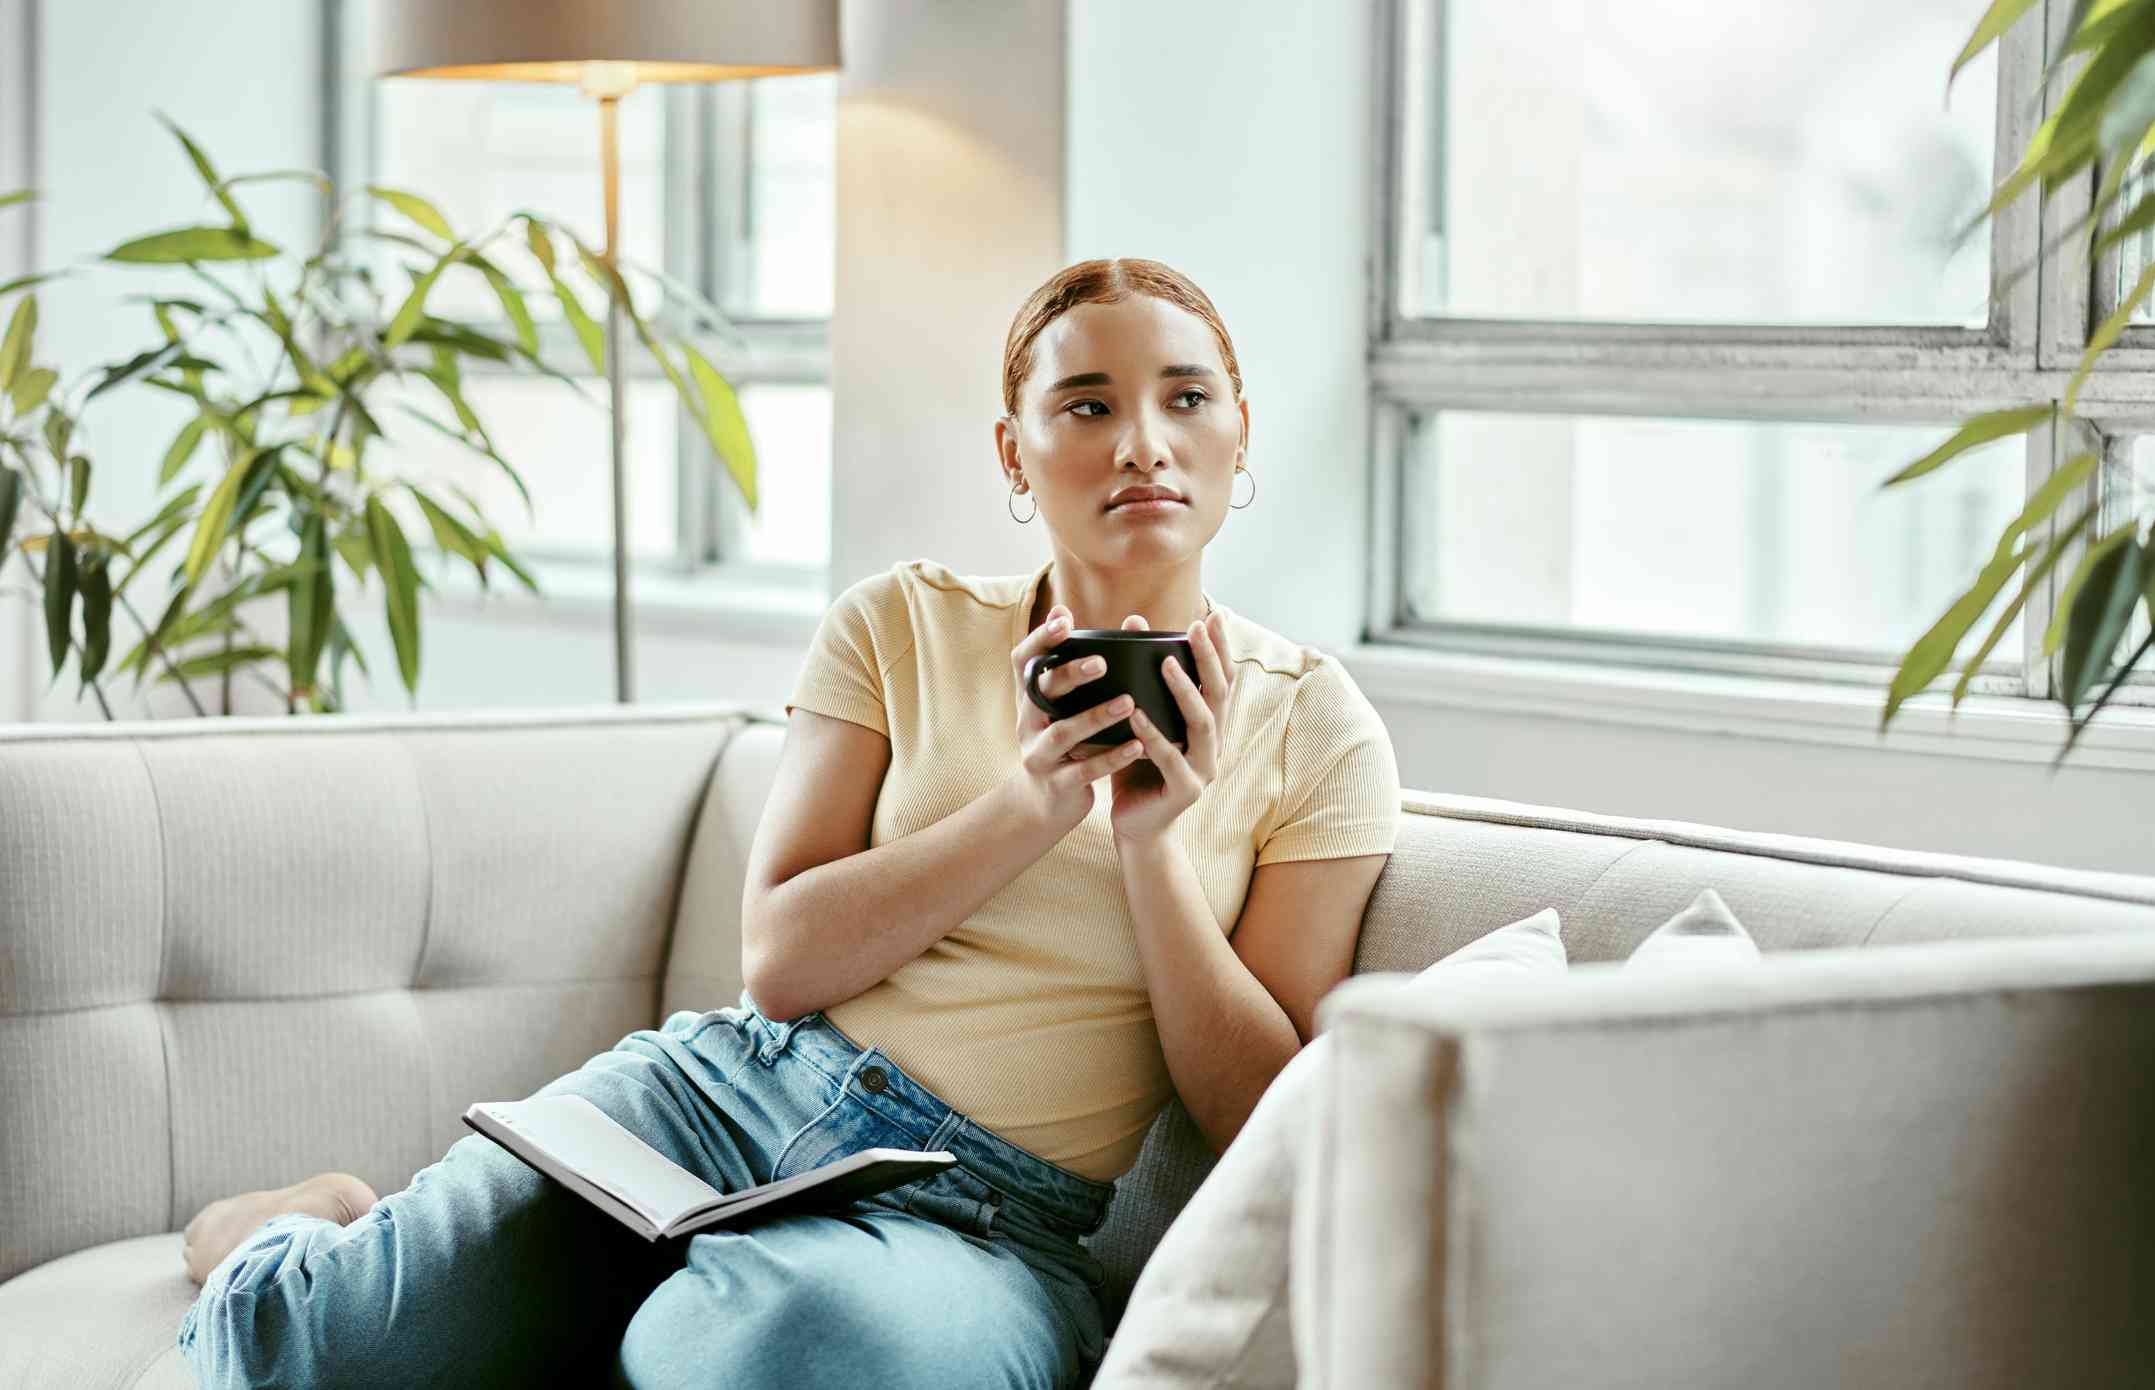 A woman in a yellow shirt sits on the couch with a cup of coffee and gazes off with a worred expression.